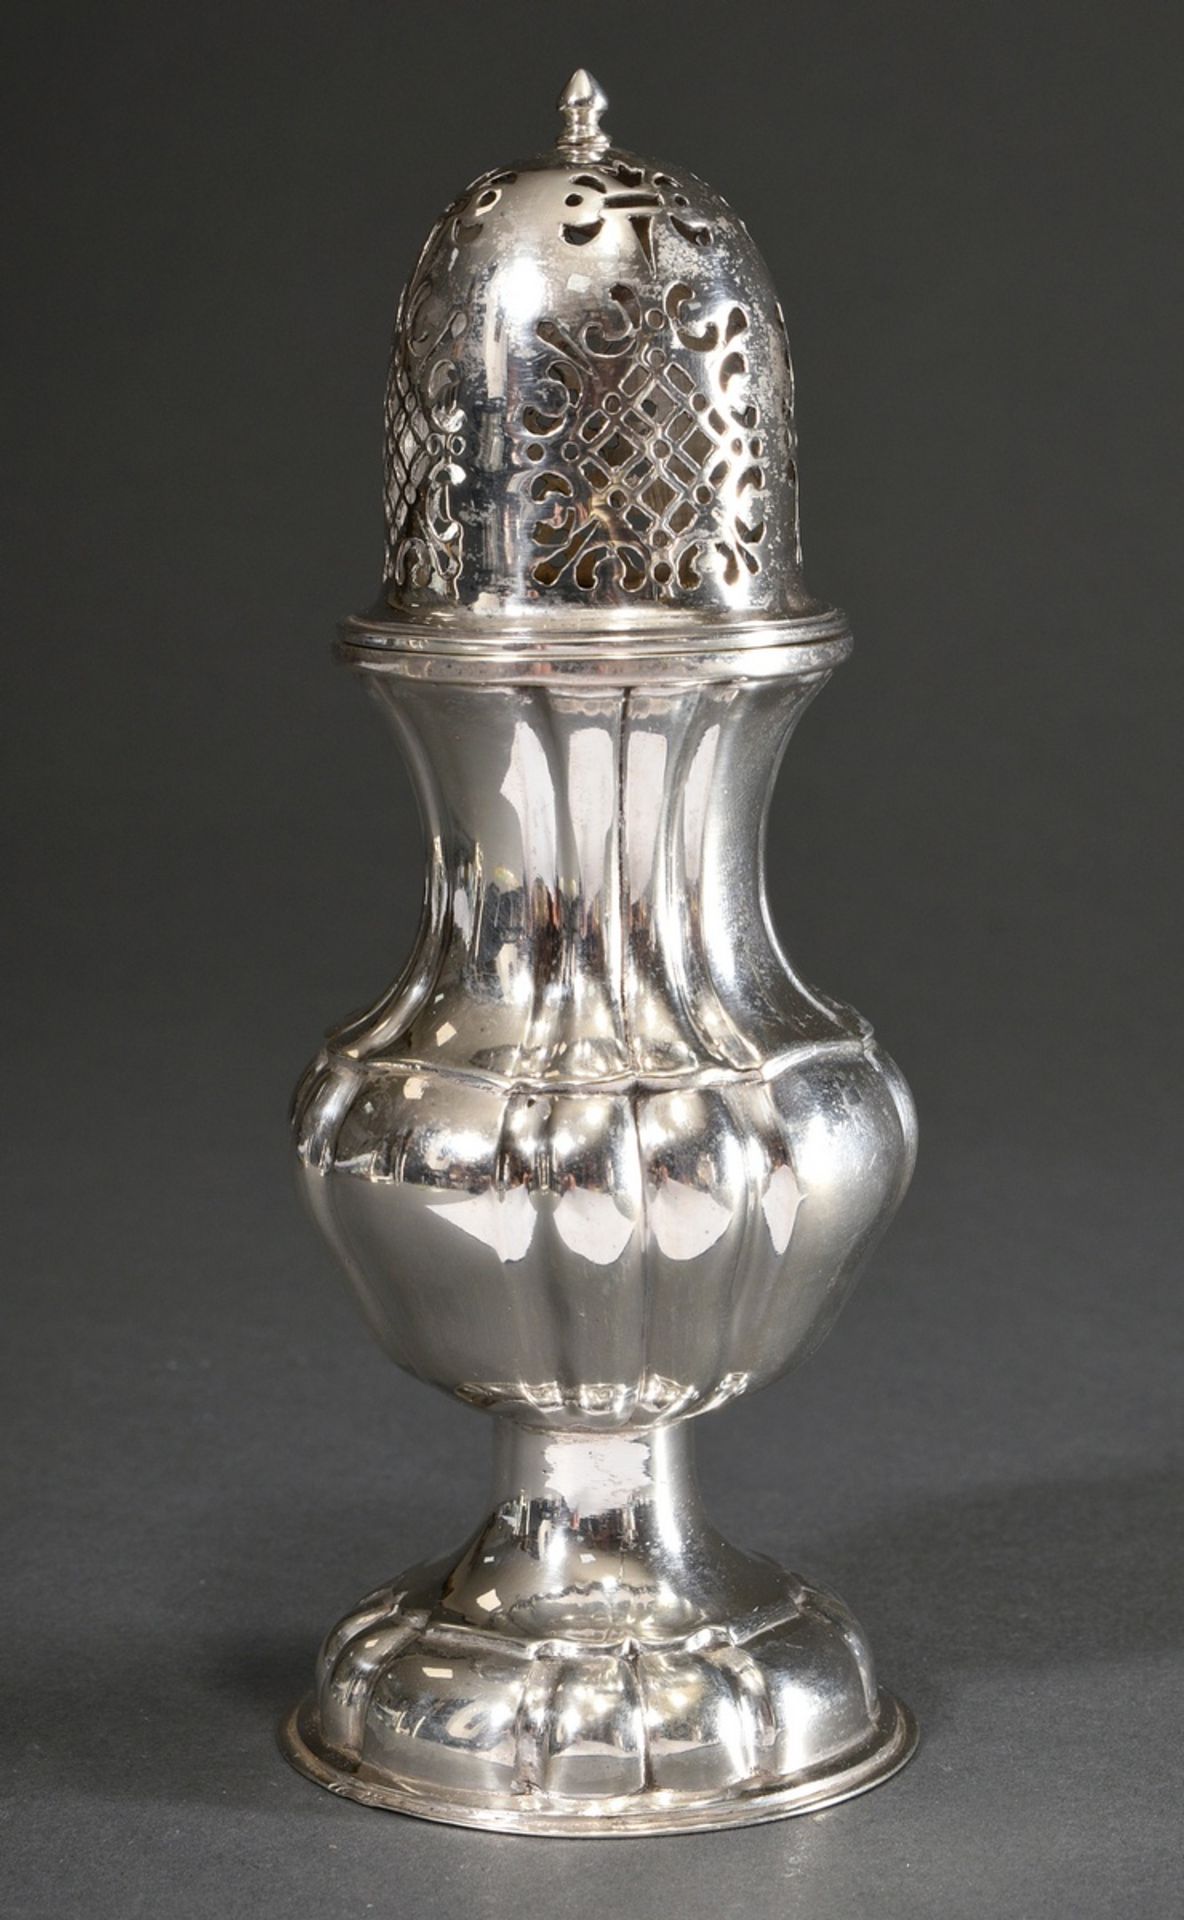 Sugar shaker with gadrooned wall in baroque façon with ornamentally pierced lid, German, silver 800